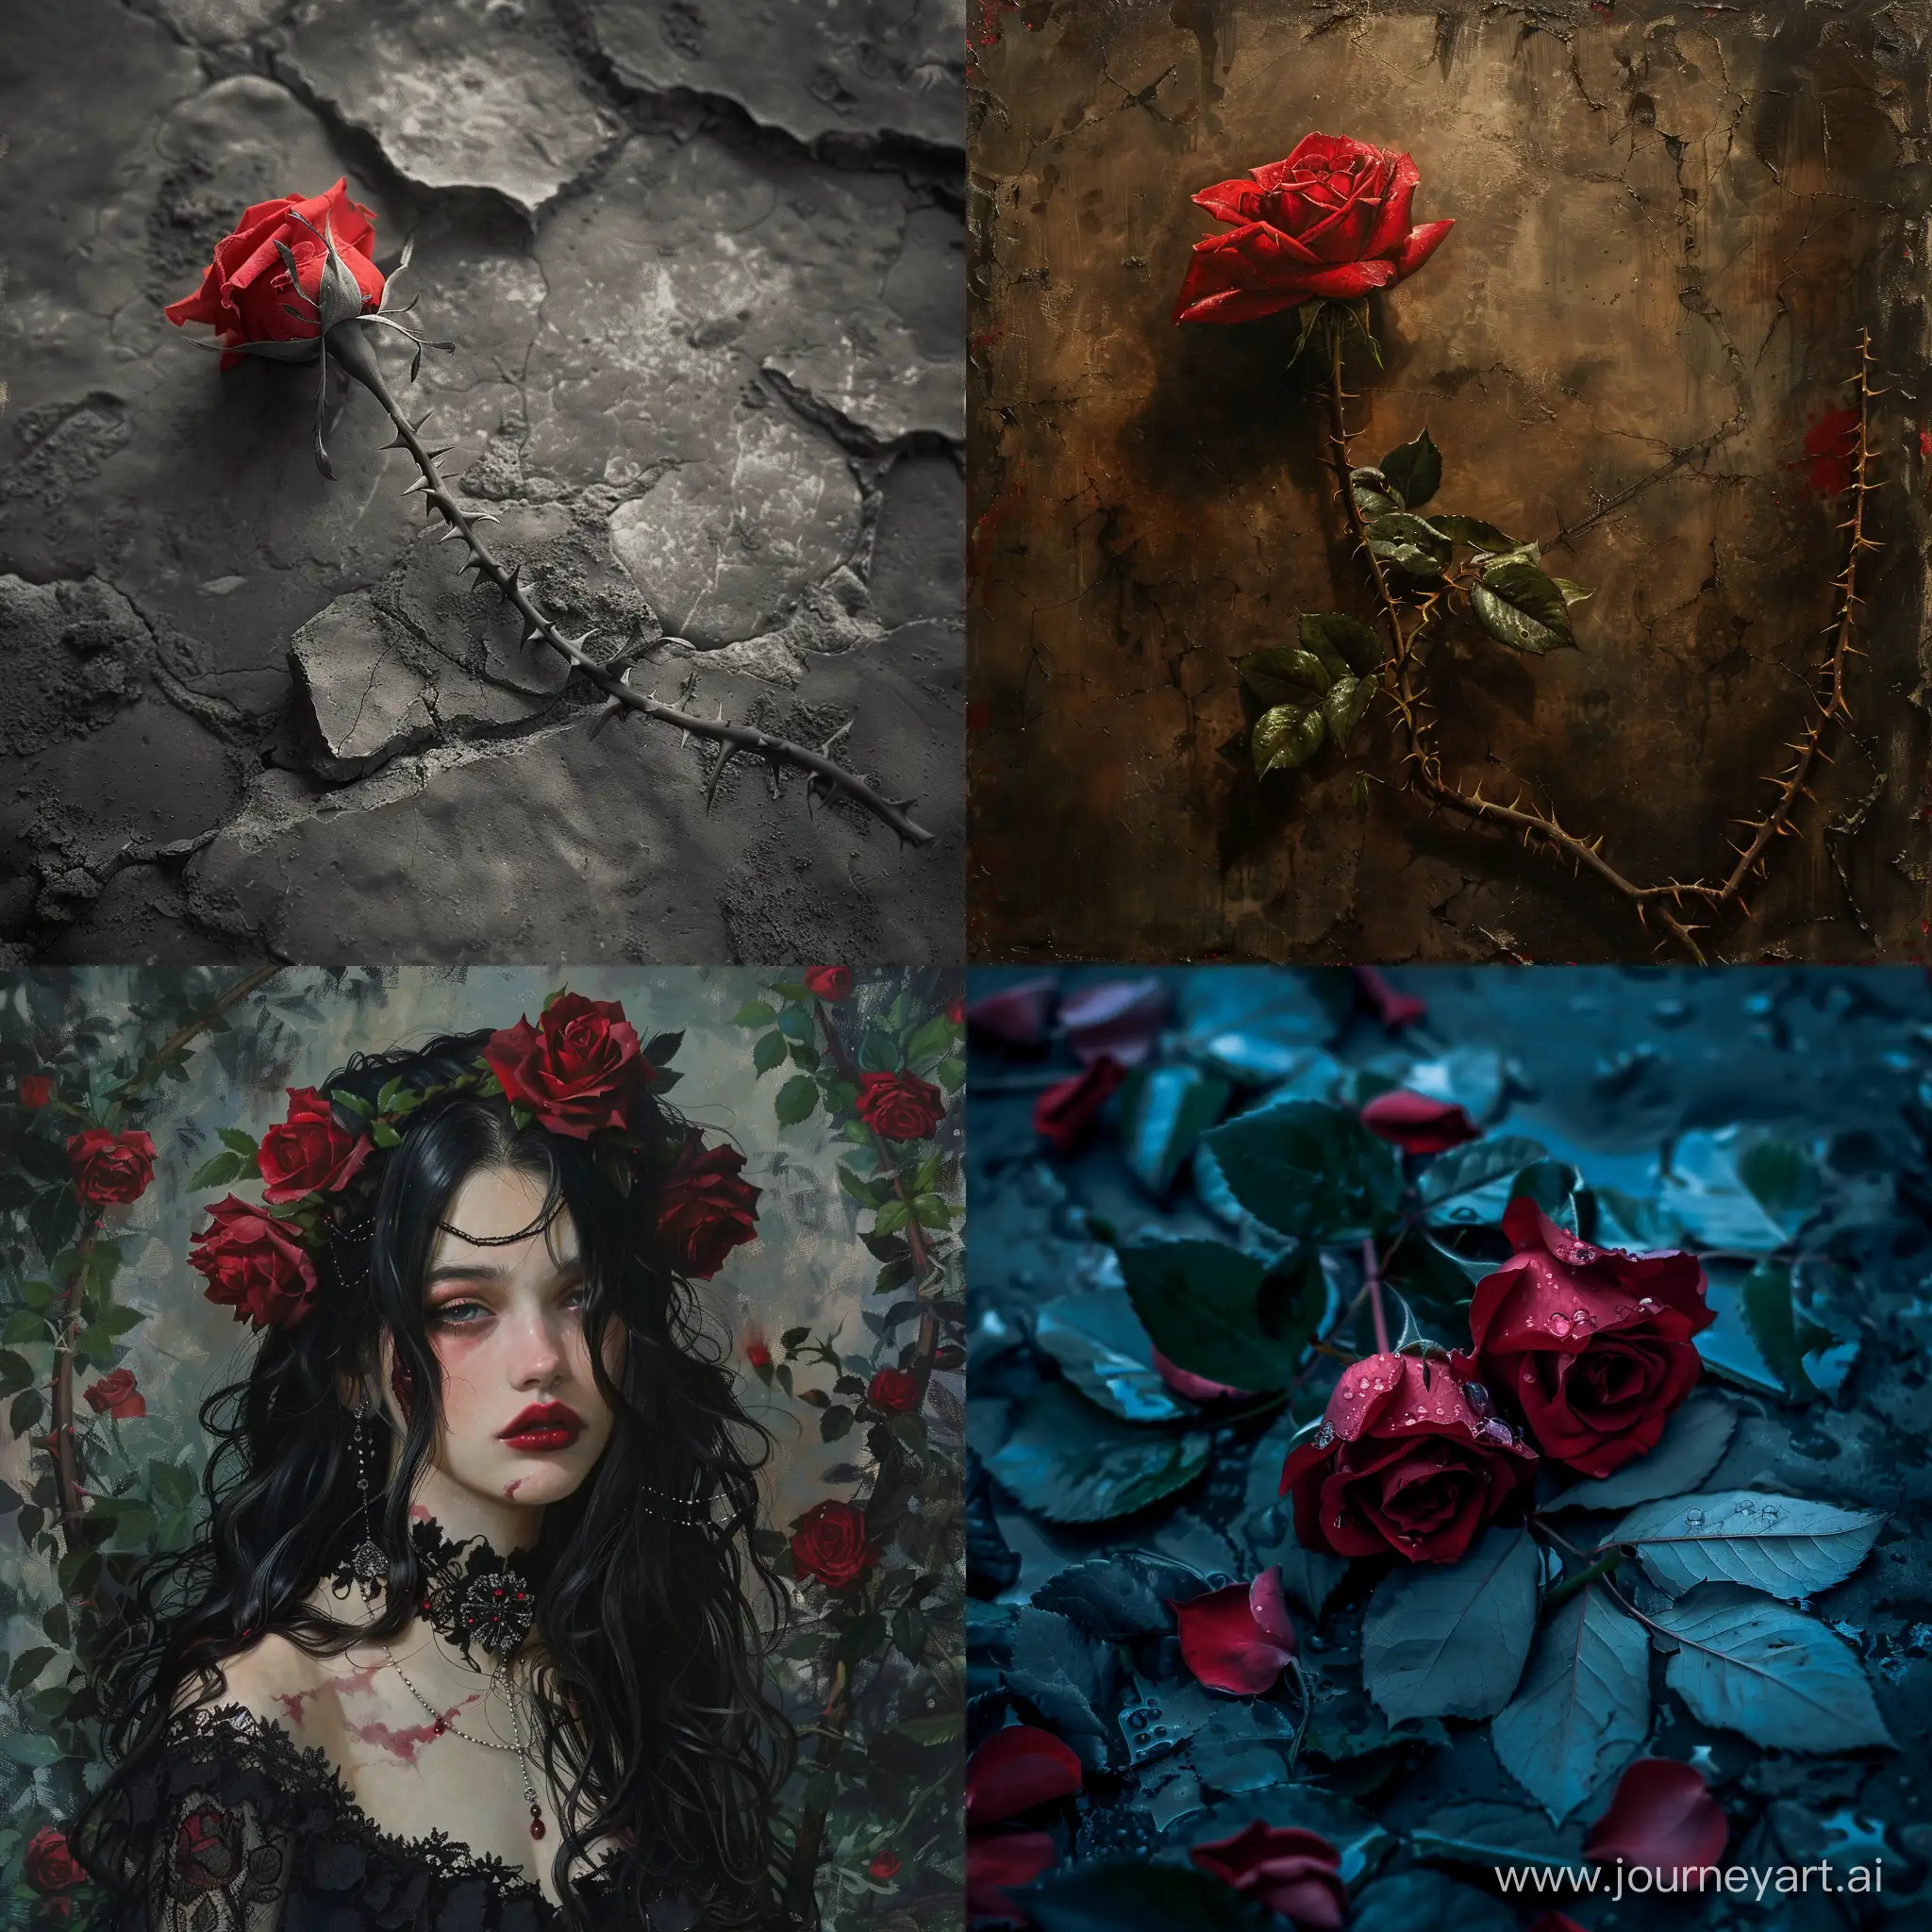 Poison-of-Love-Disappointment-with-Thorny-Roses